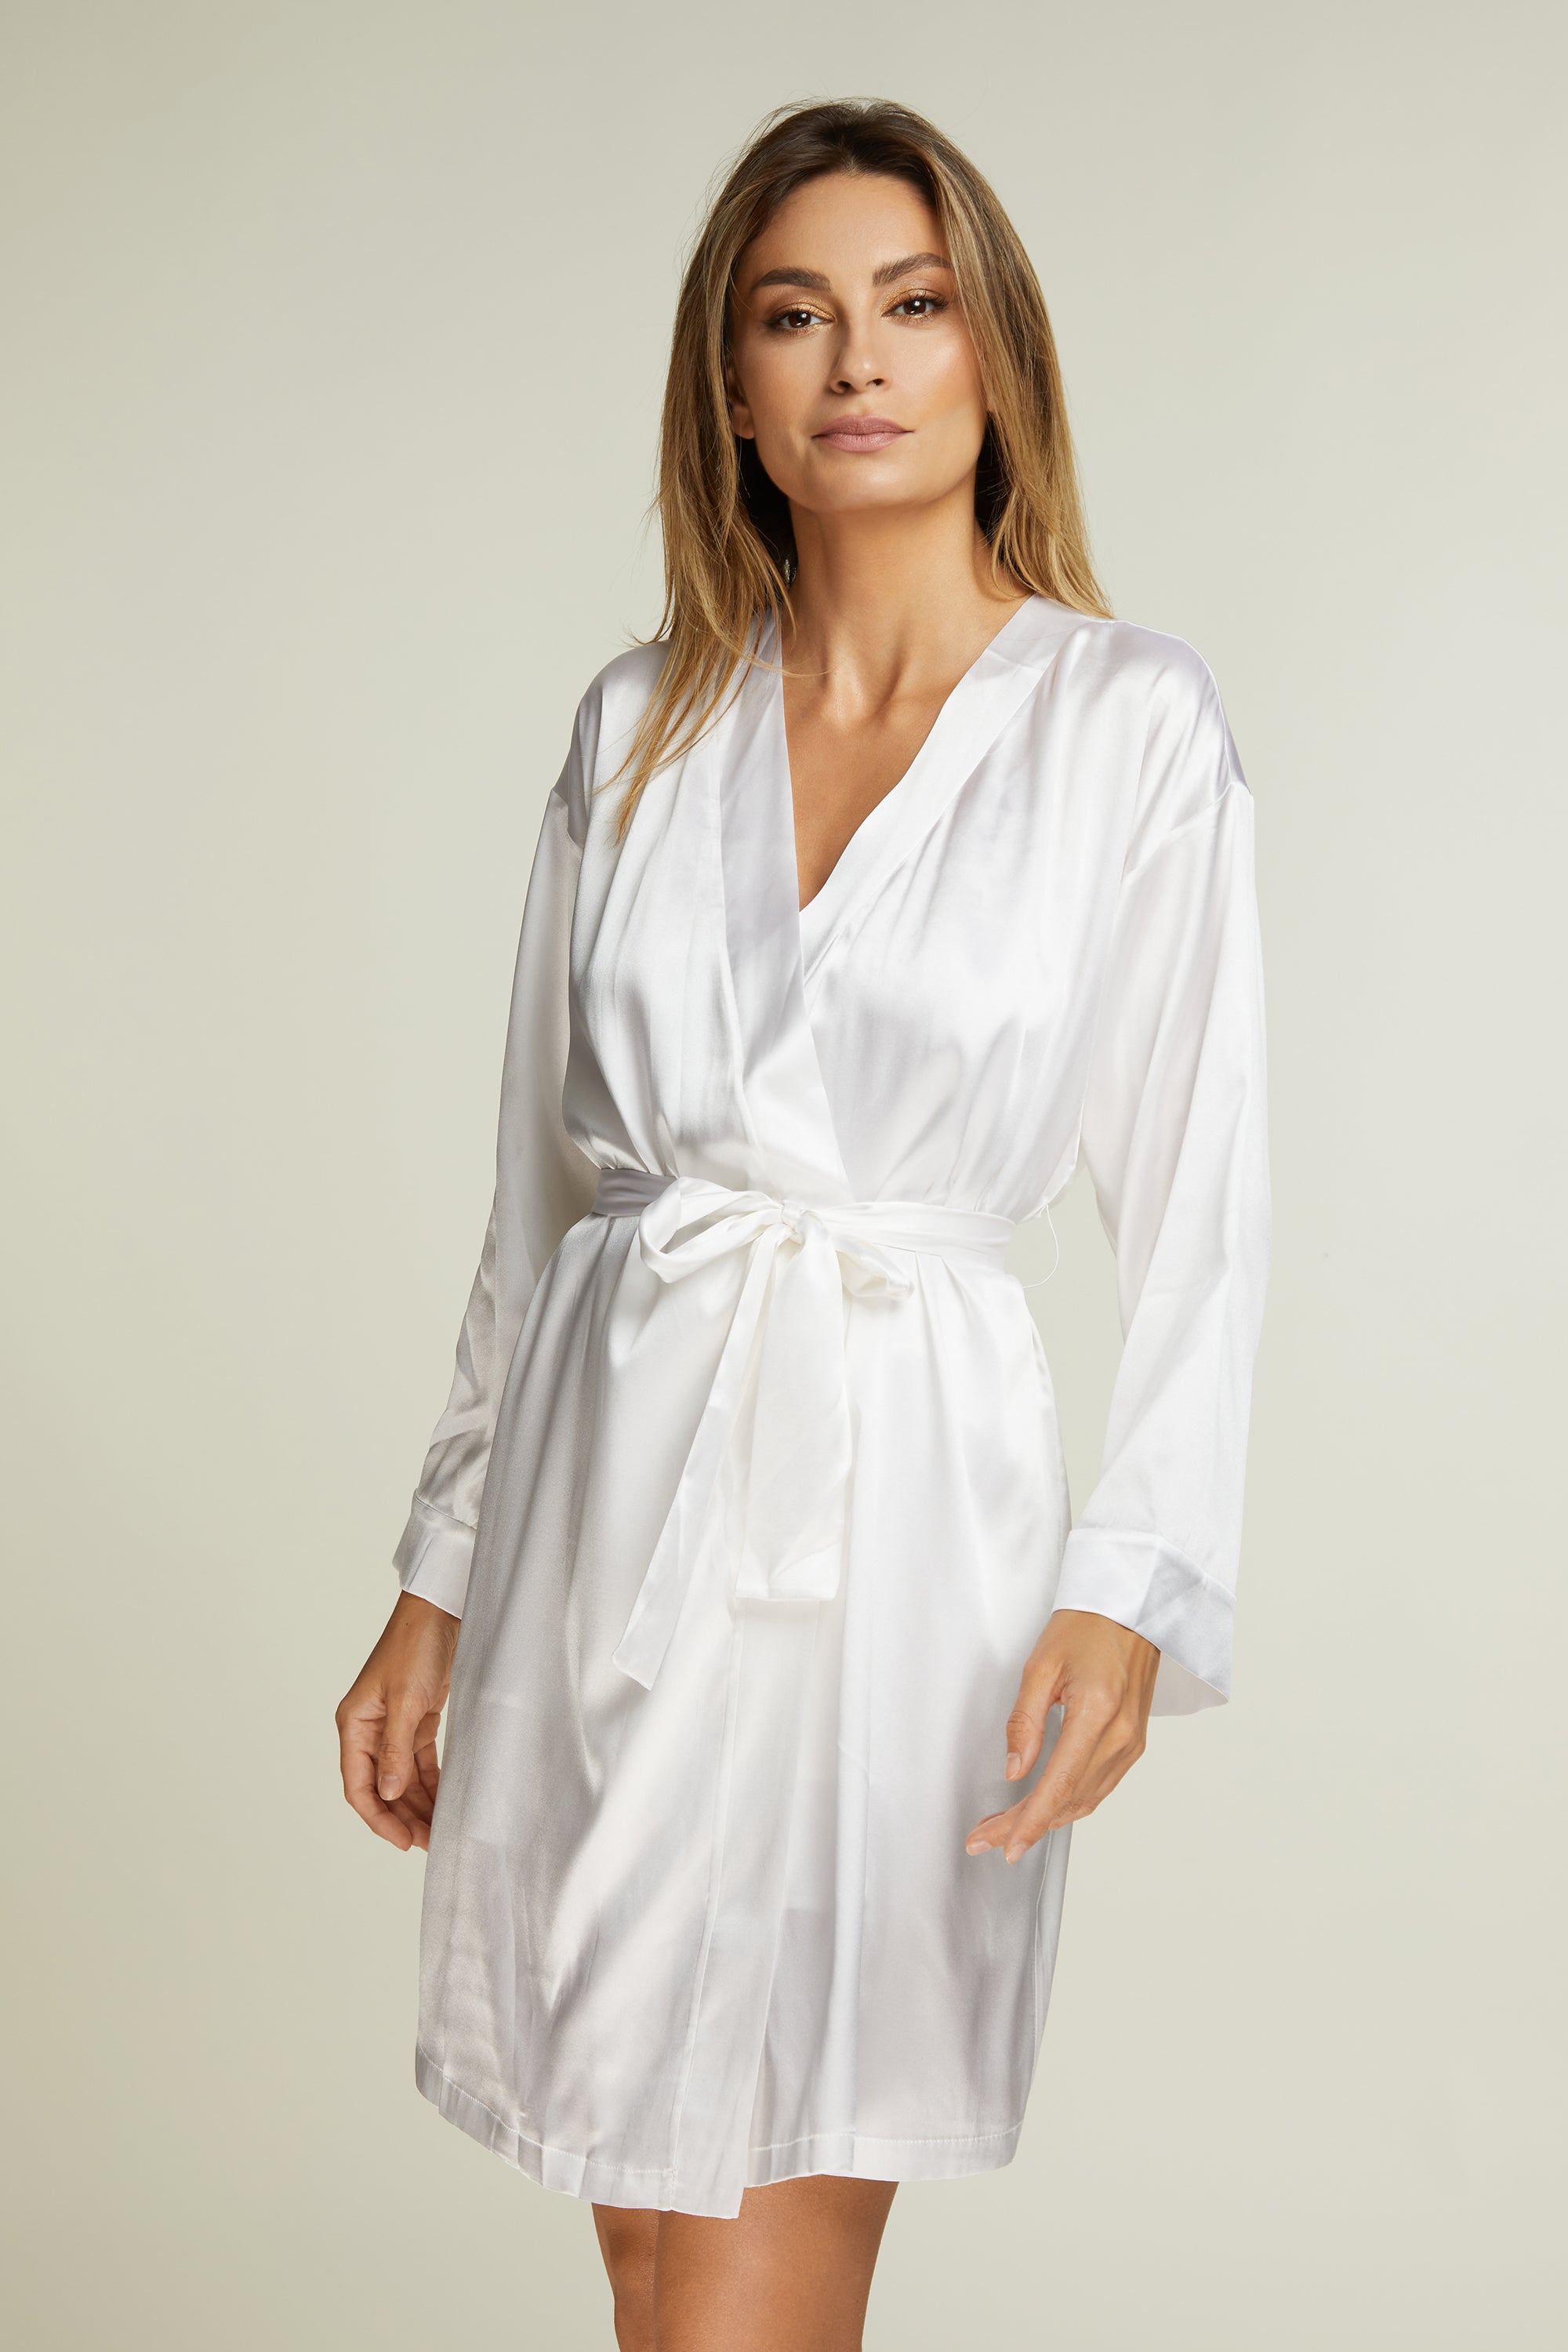 Darlings Silk and Satin Dressing Gown | Intimissimi